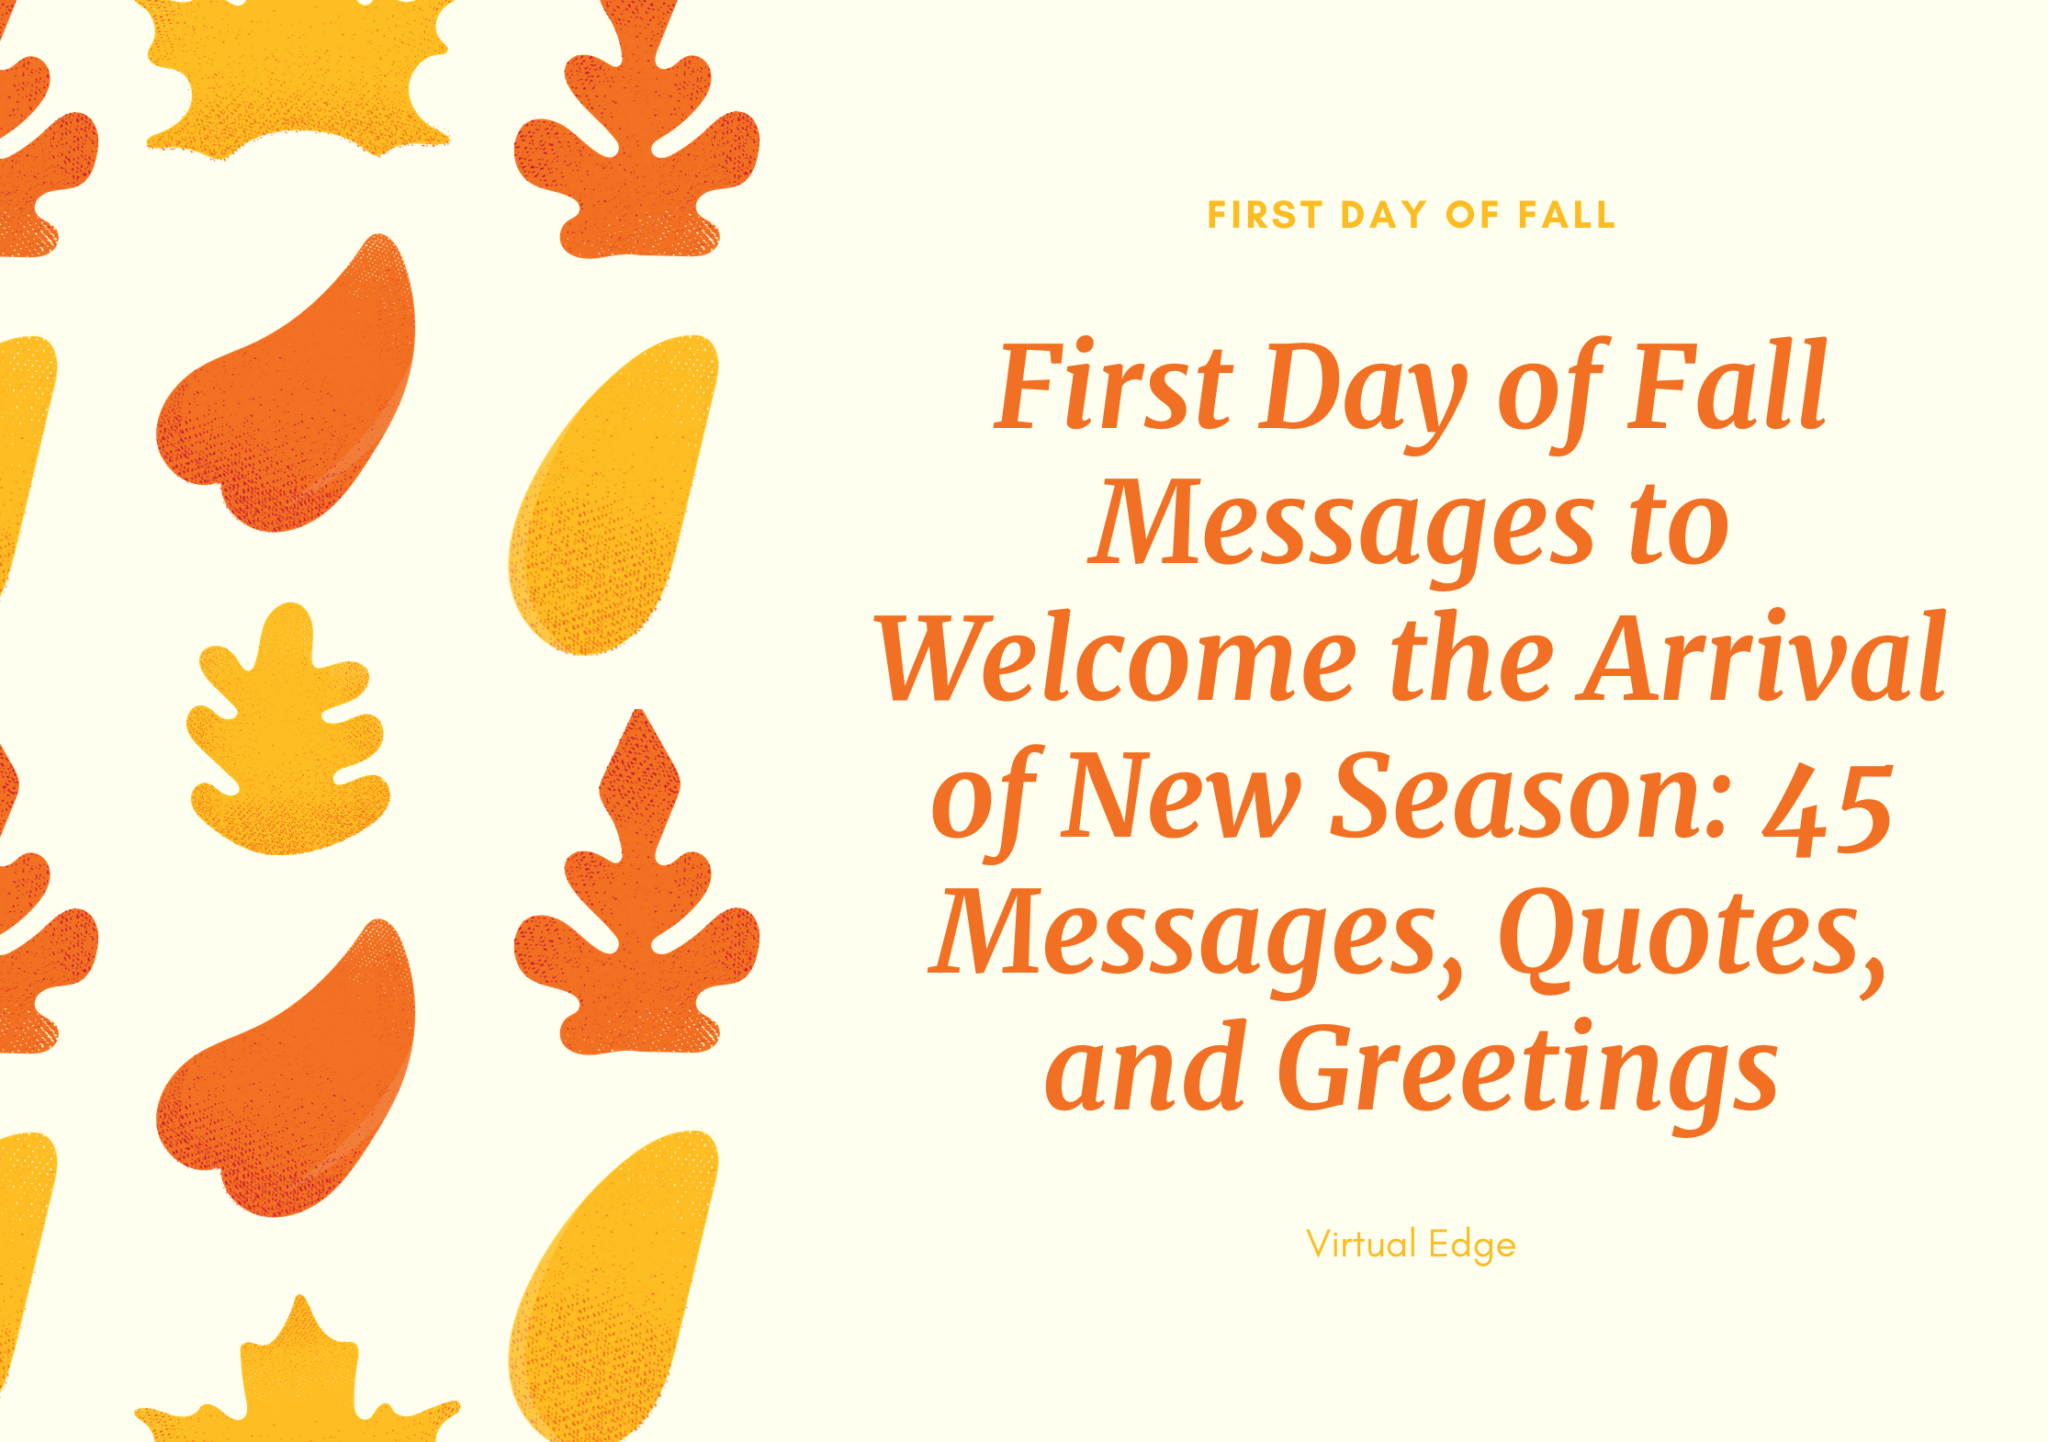 First Day of Fall Messages to the Arrival of New Season 45